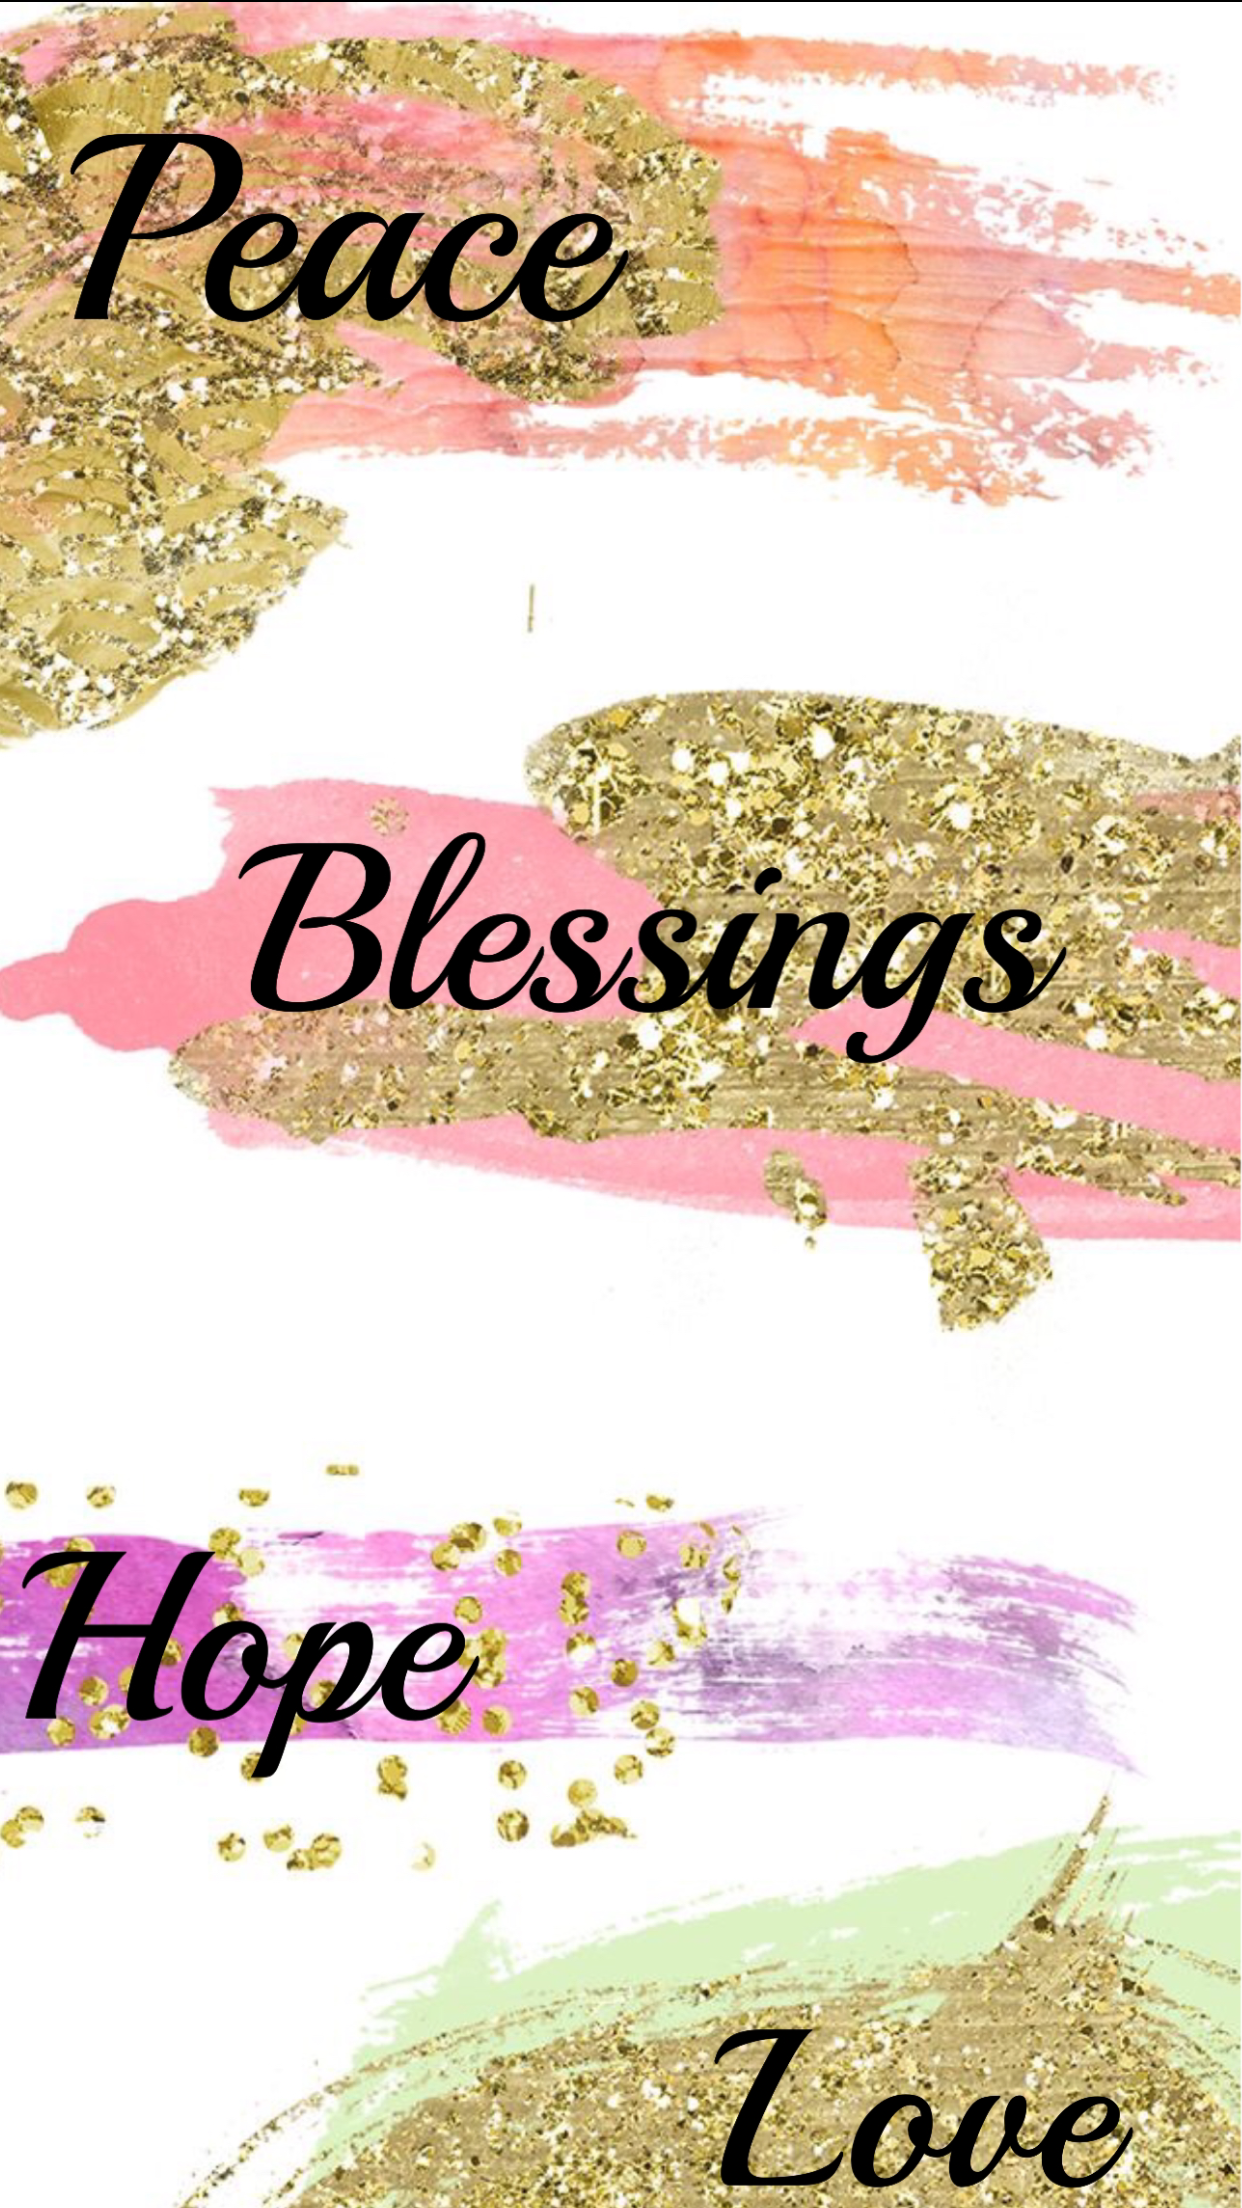 Peace and Blessings iPhone Wallpaper. iPhone wallpaper girly, Wallpaper iphone cute, iPhone wallpaper glitter